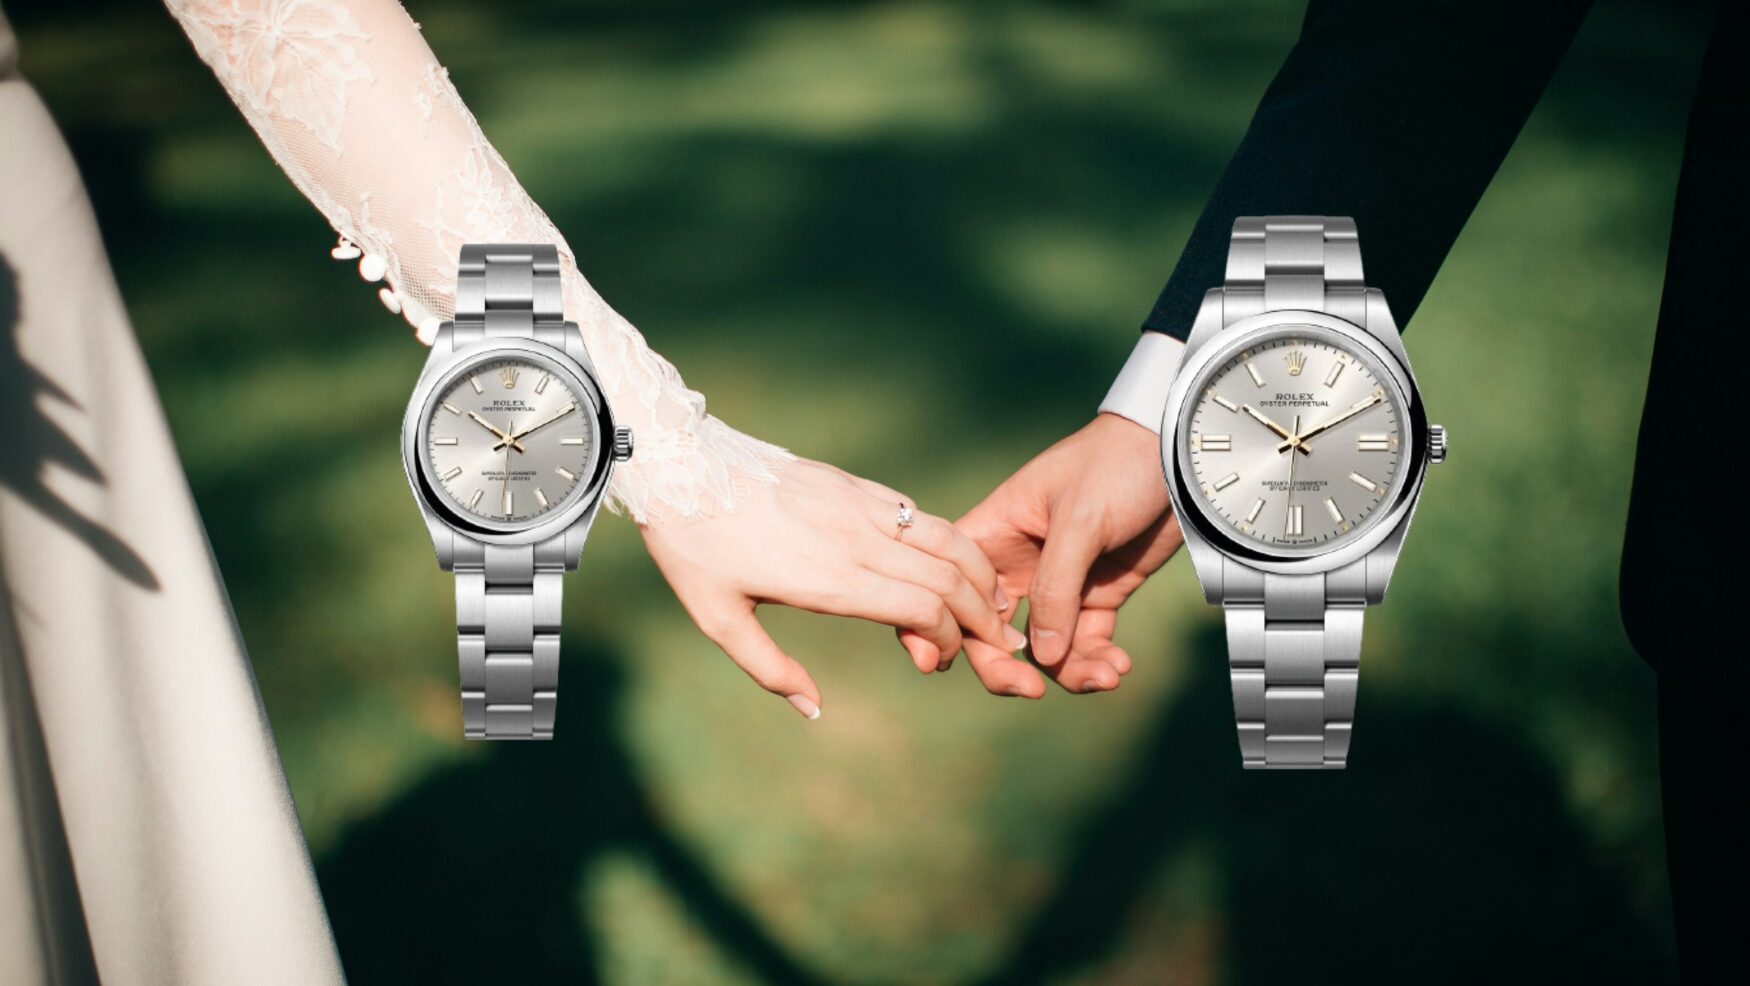 How to pick the best watch for your wedding